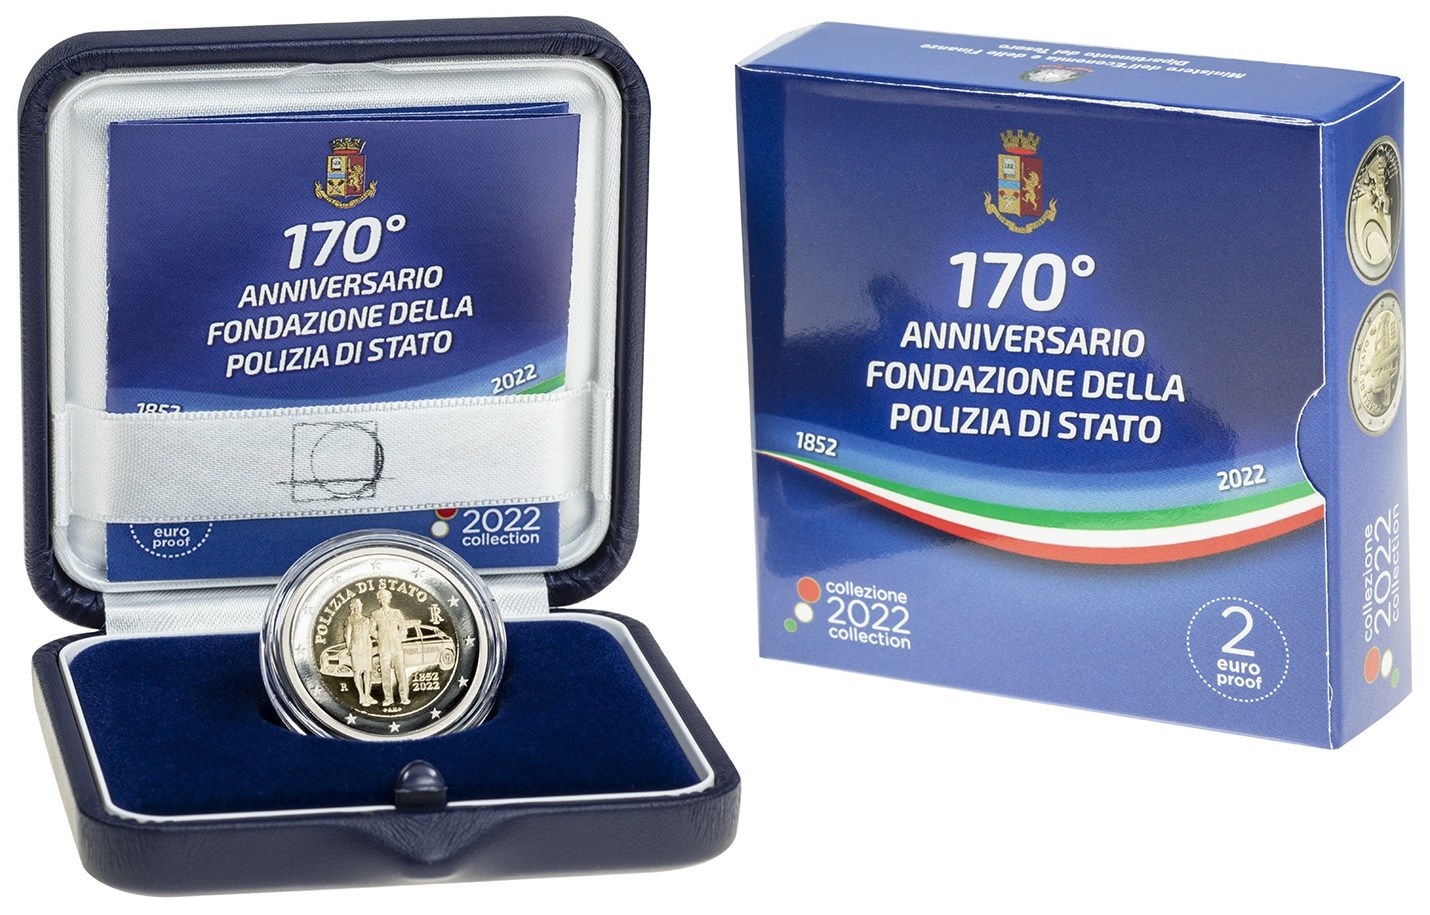 (EUR10.Proof.2022.48-2MS10-22P002) 2 euro Italy 2022 Proof - State Police (packaging) (zoom)